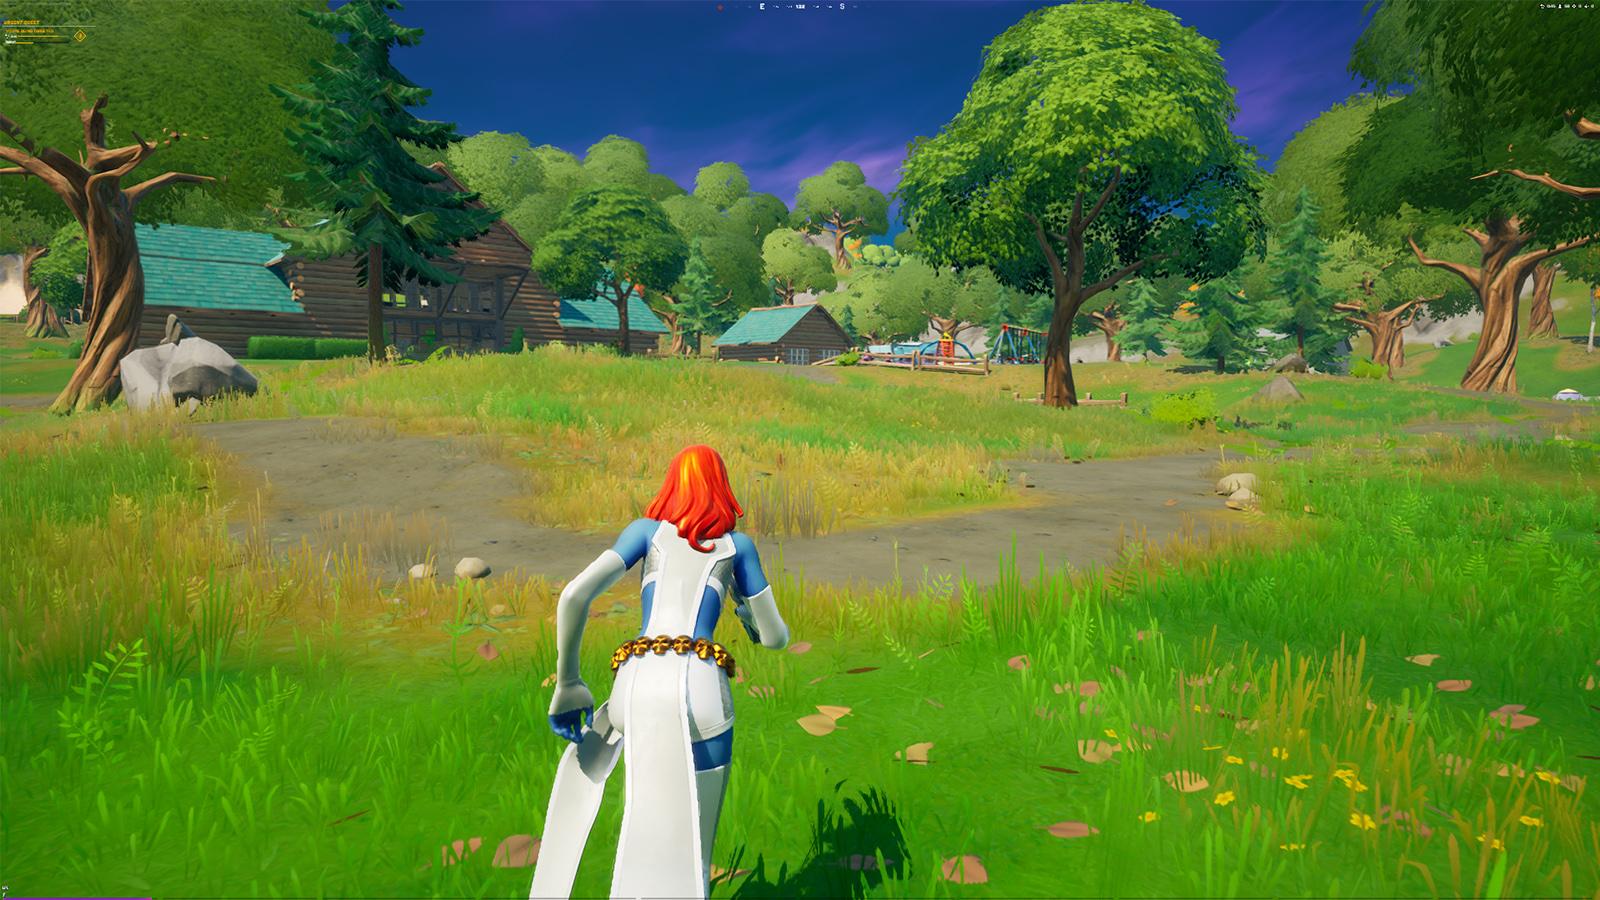 Fortnite's Weeping Woods has seen a change, too